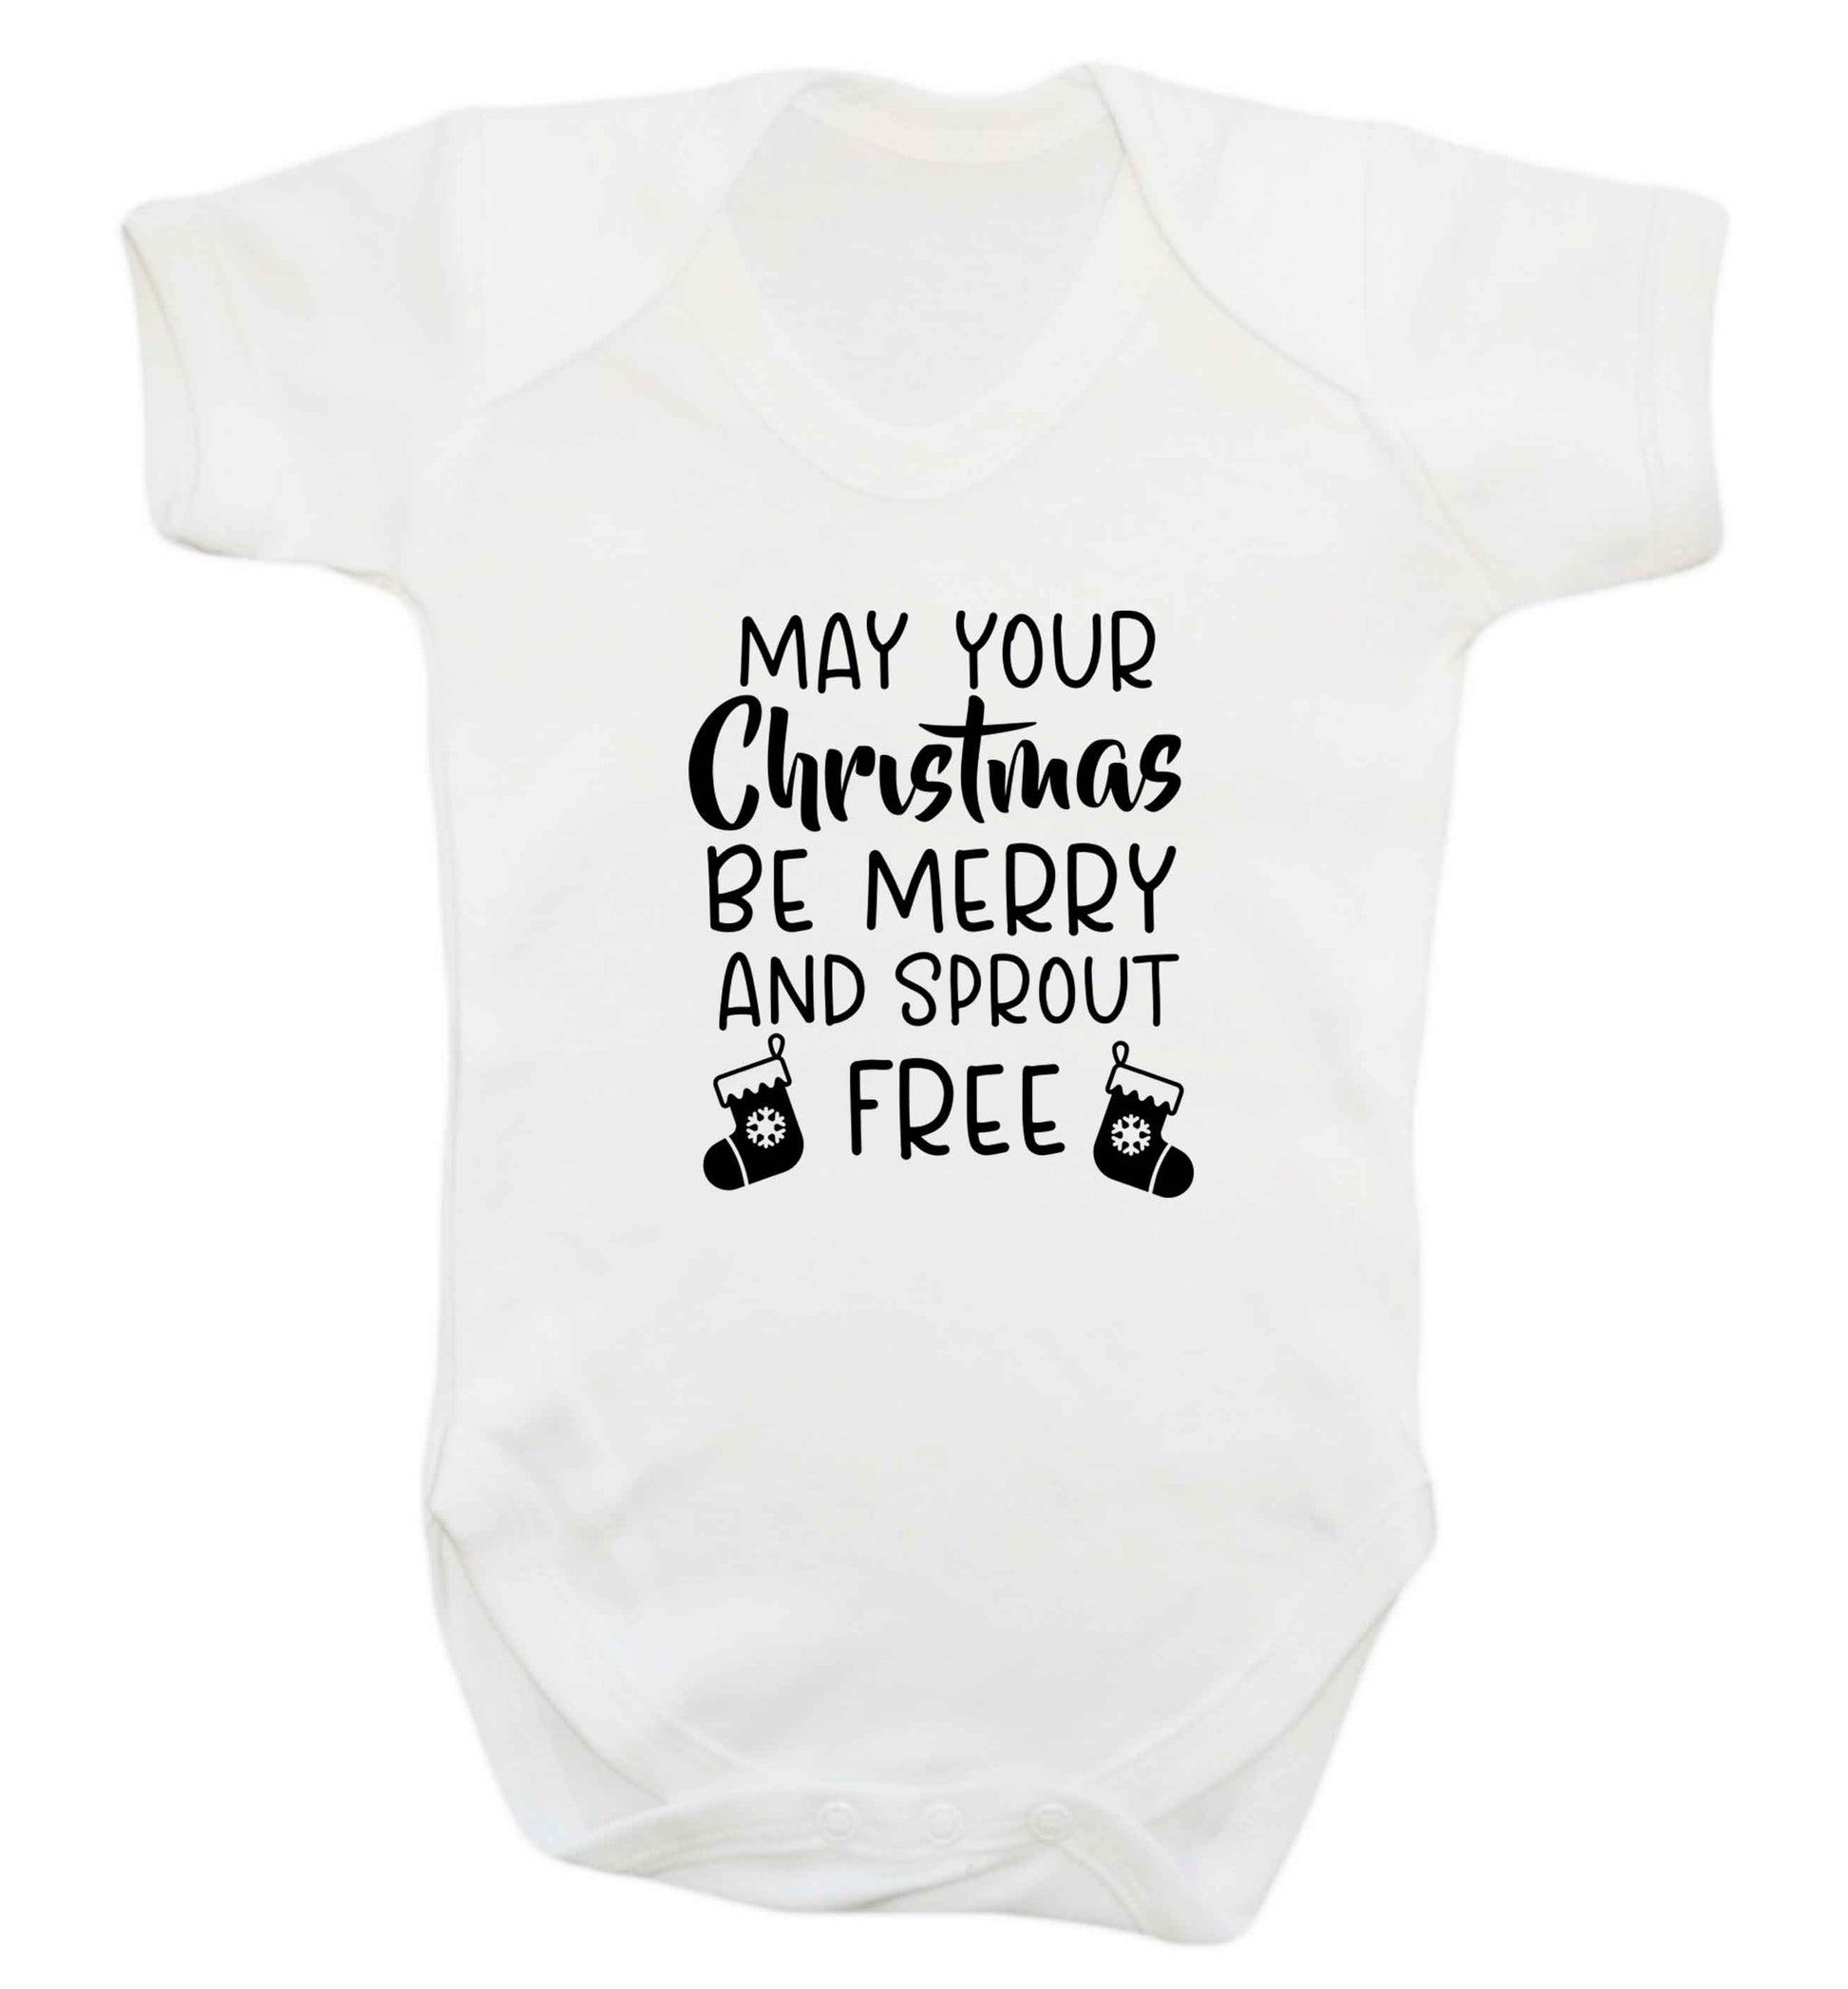 May your Christmas be merry and sprout free baby vest white 18-24 months